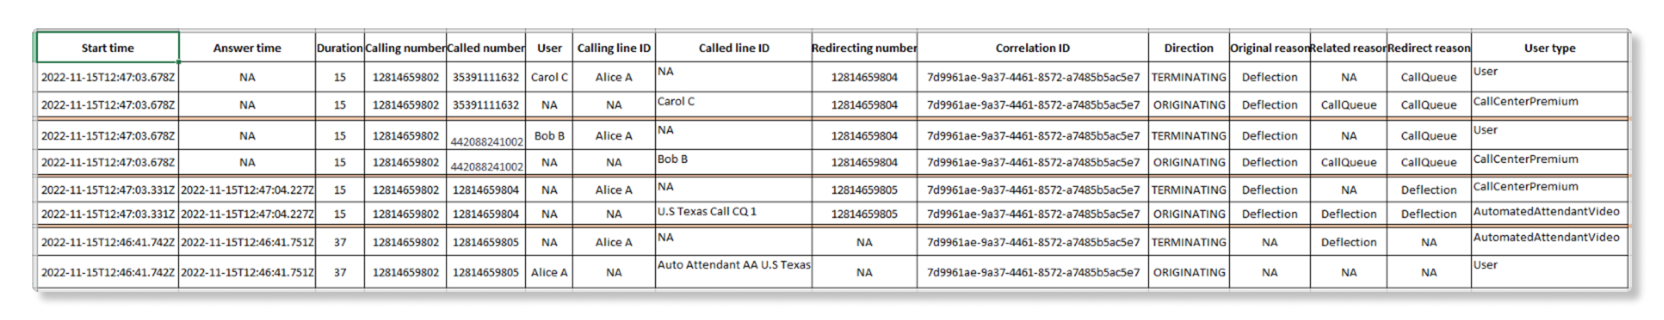 Example for a call made to an auto-attendant number and call redirected to a call queue service